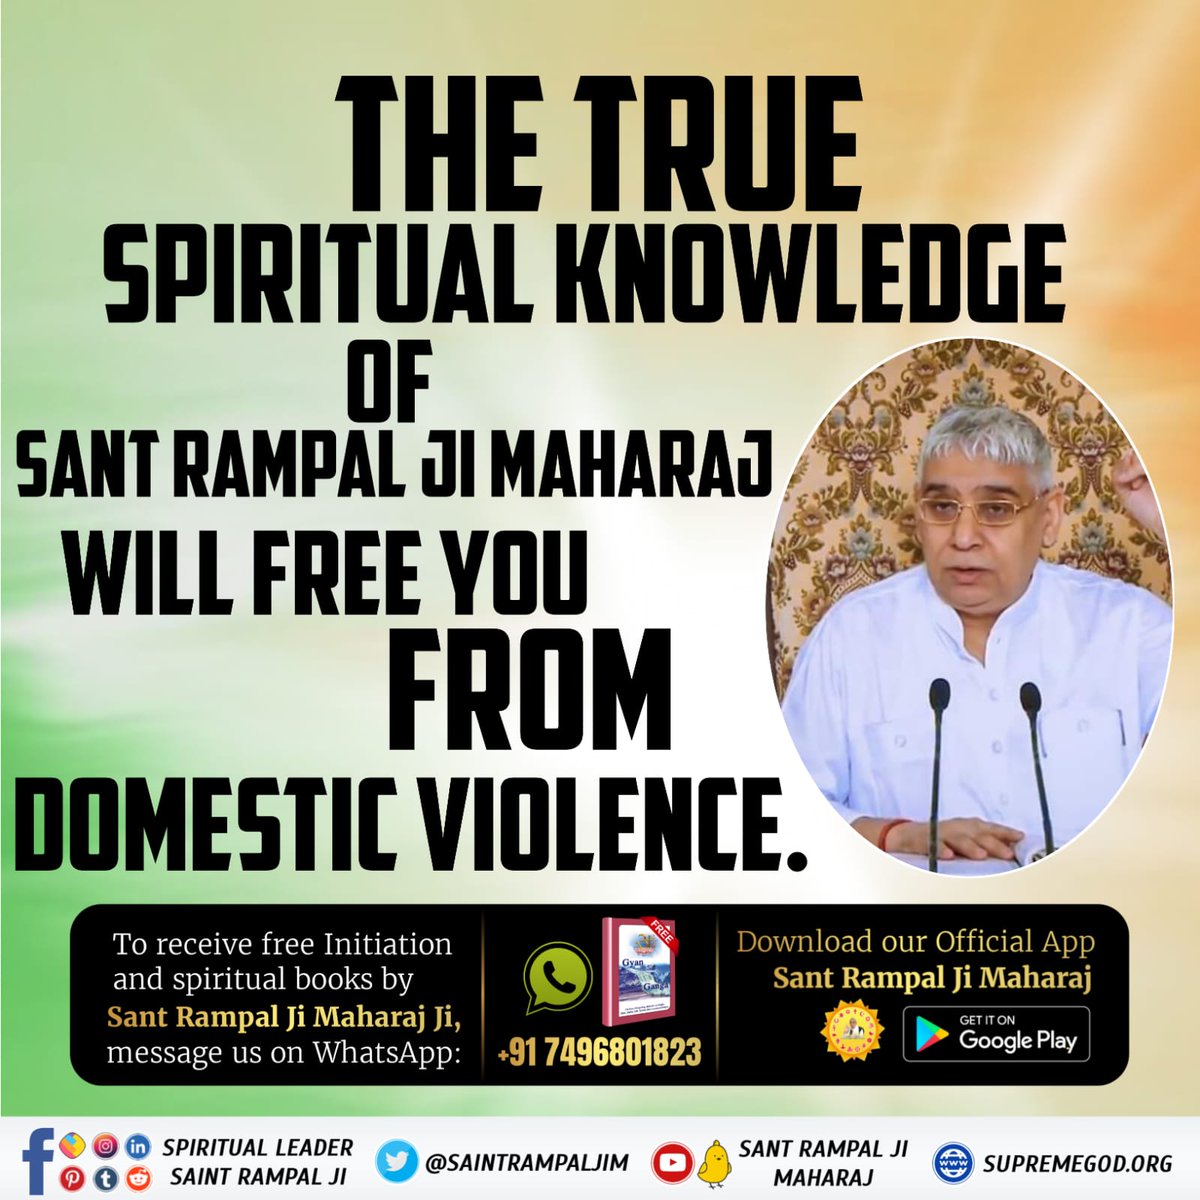 #FreedomFromEvils THE TRUE SPRITUAL KNOWLEDGE OF SANT RAMPAL JI MAHARAJ WILL FREE YOU FROM DOMESTIC VIOLENCE. #GodMorningWednesday